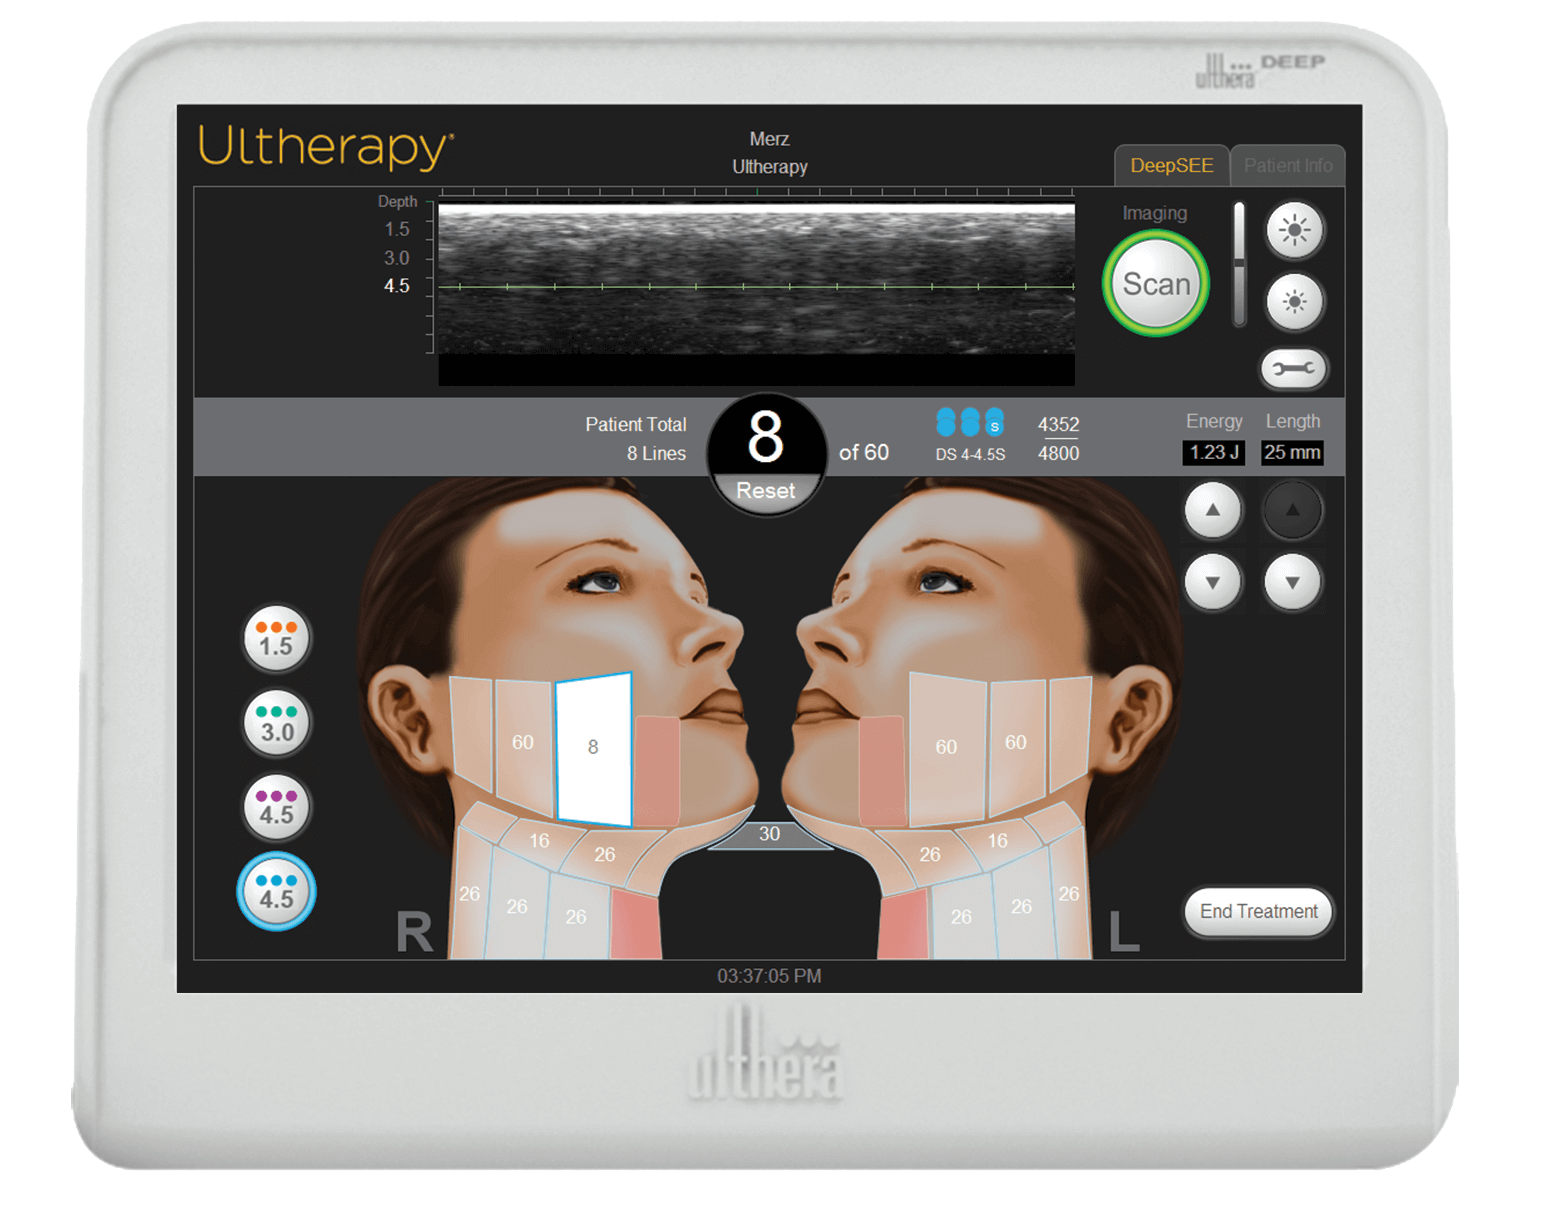 Touchscreen control unit for effective Ultherapy treatments